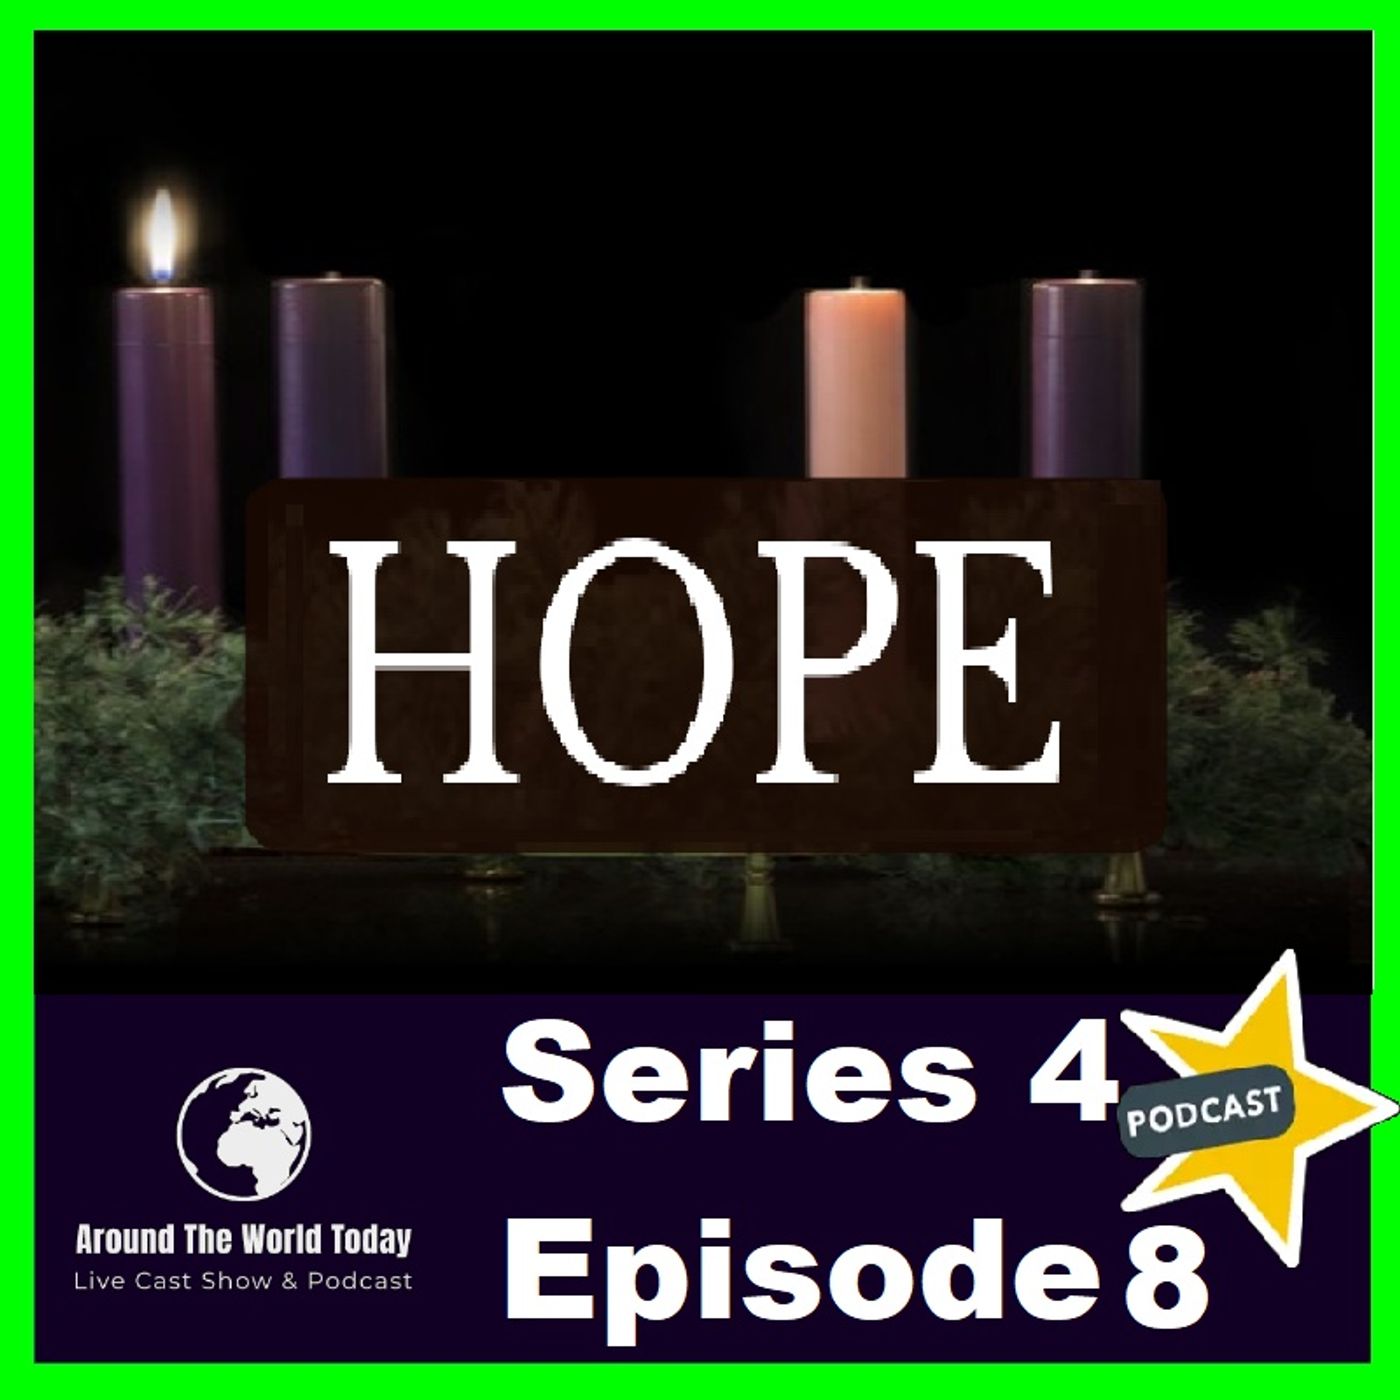 Around the World Today Series 4 Episode 8 - Advent 1 HOPE